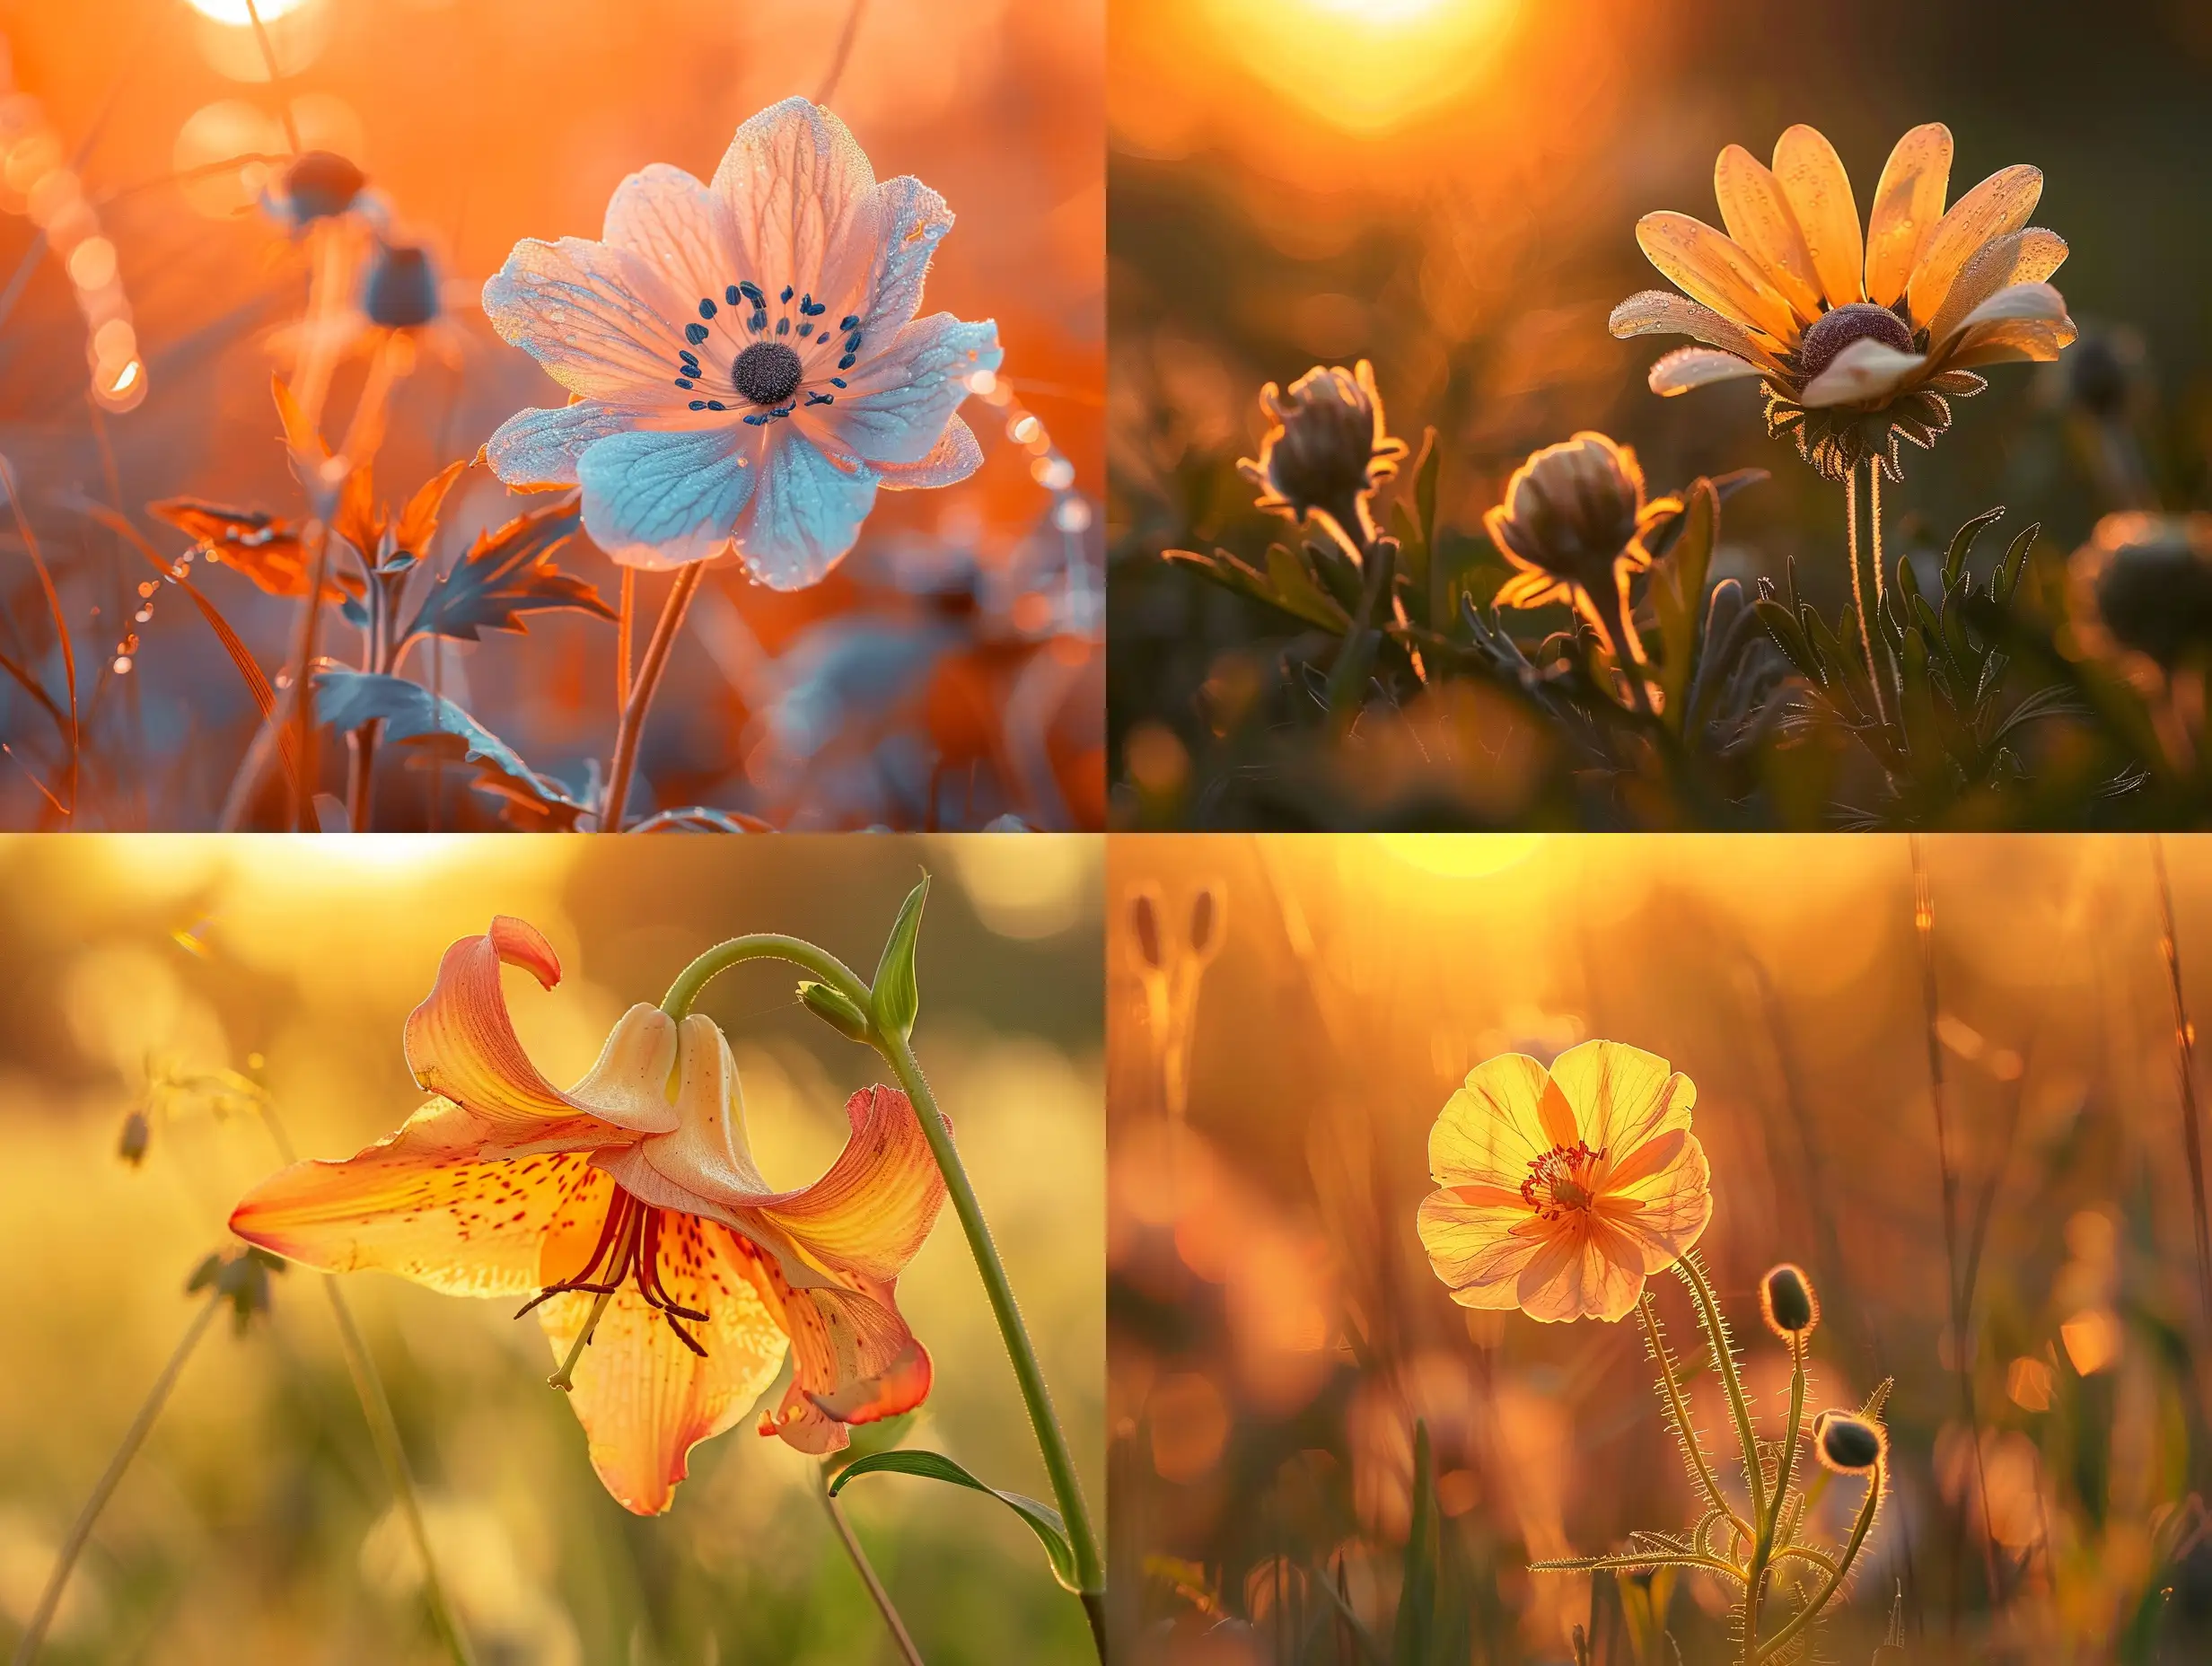 Golden-Hour-Photography-of-a-Beautiful-Flower-with-a-Missing-Petal